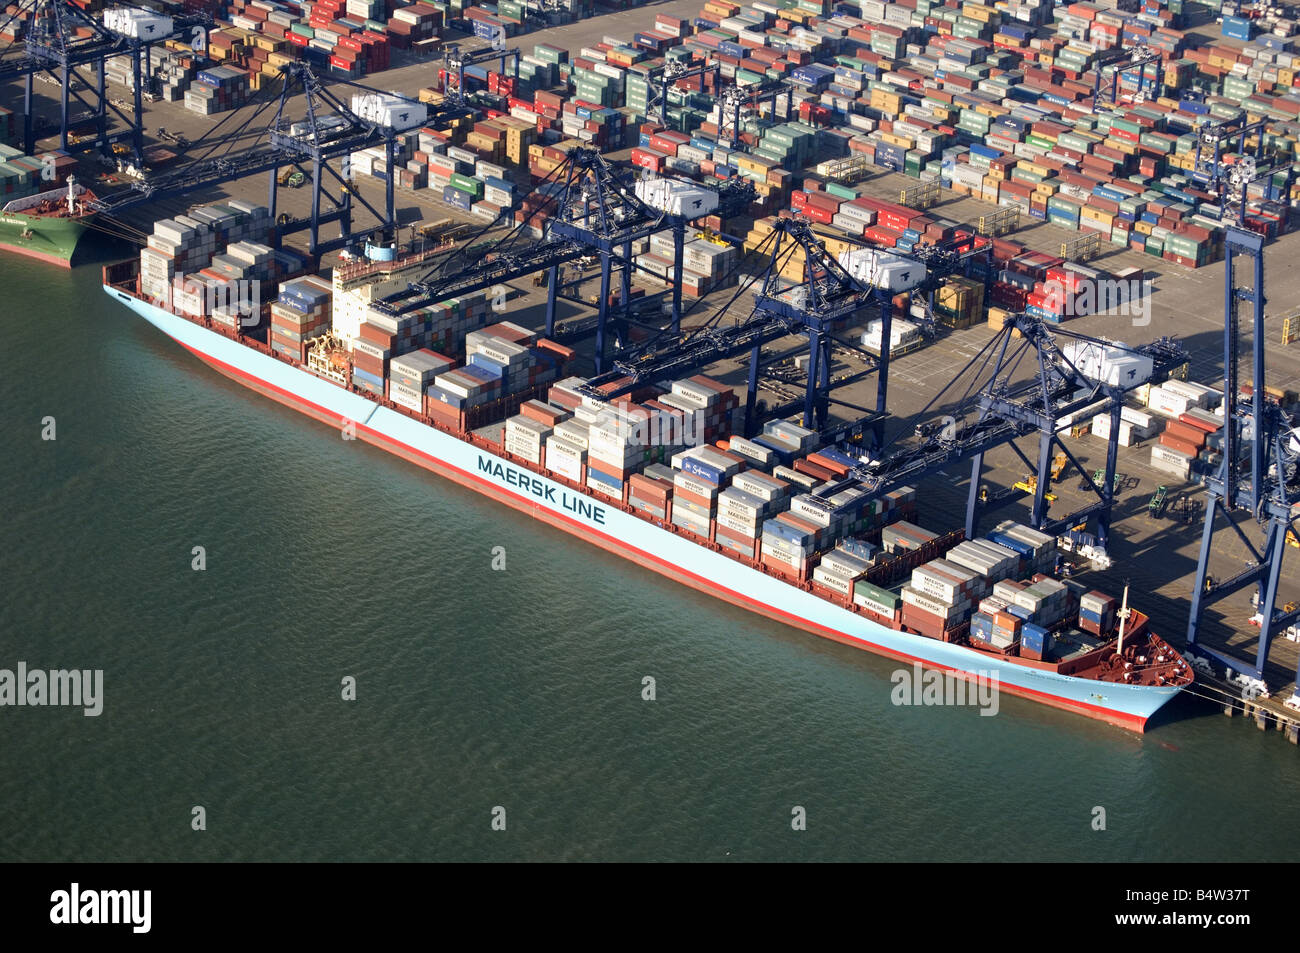 The Maren Maersk of the Maersk Line at Felixstowe Port UK. Aerial view. Stock Photo